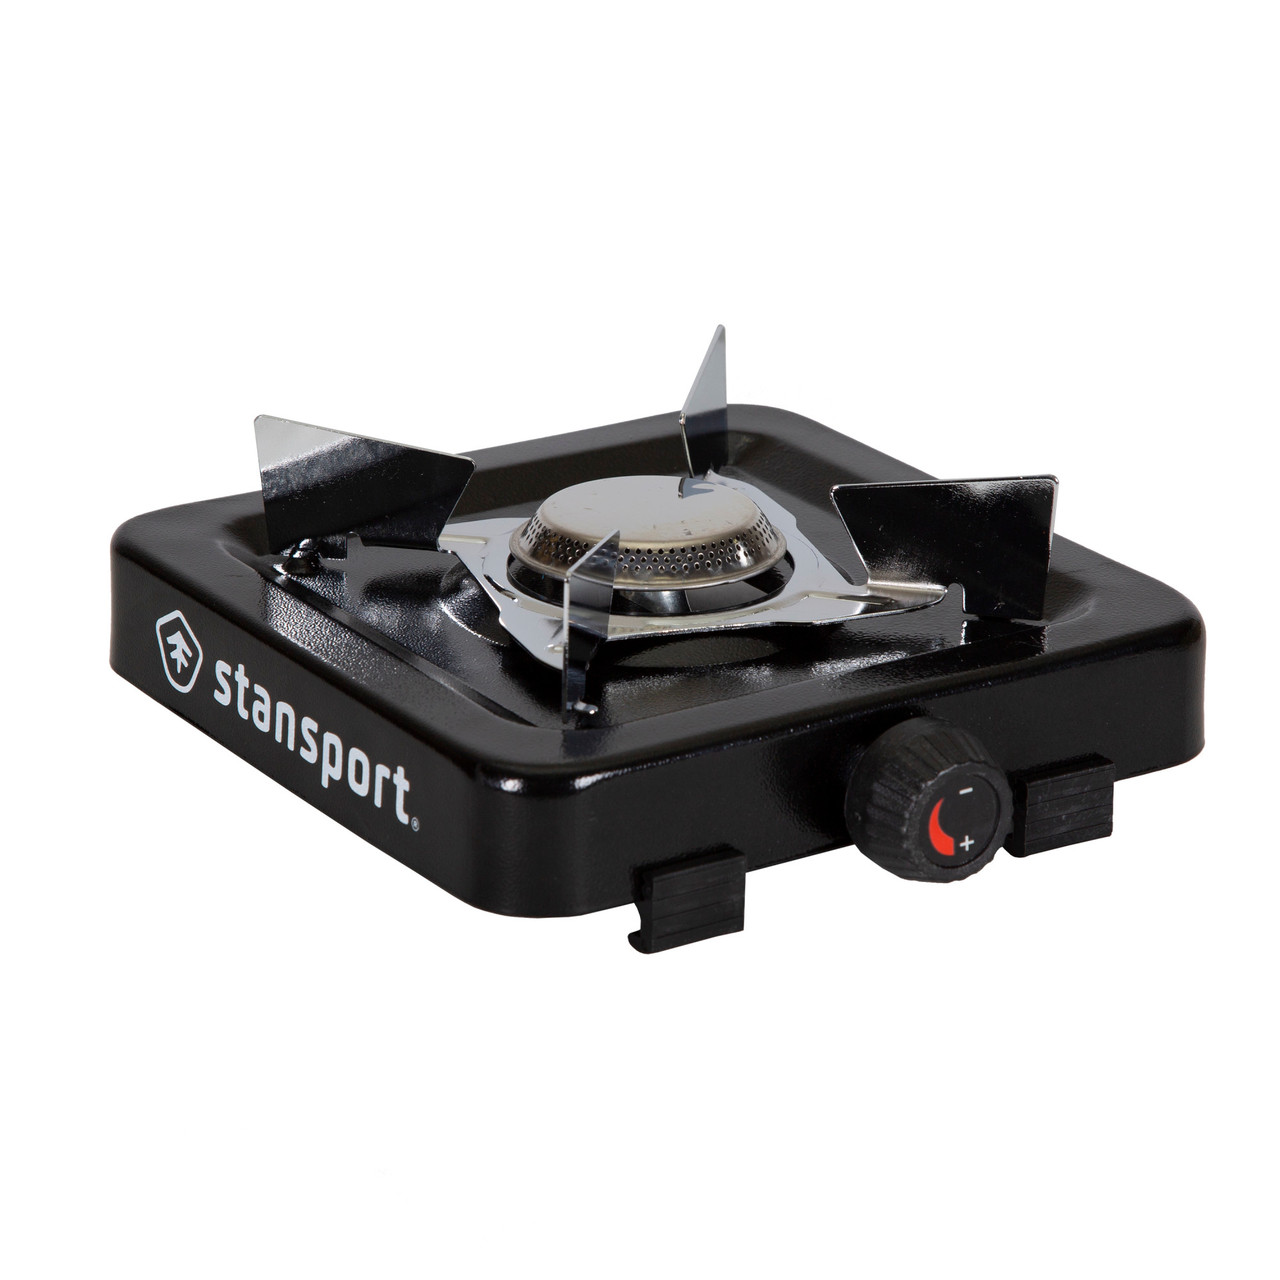 Stansport Portable Outdoor Butane Stove